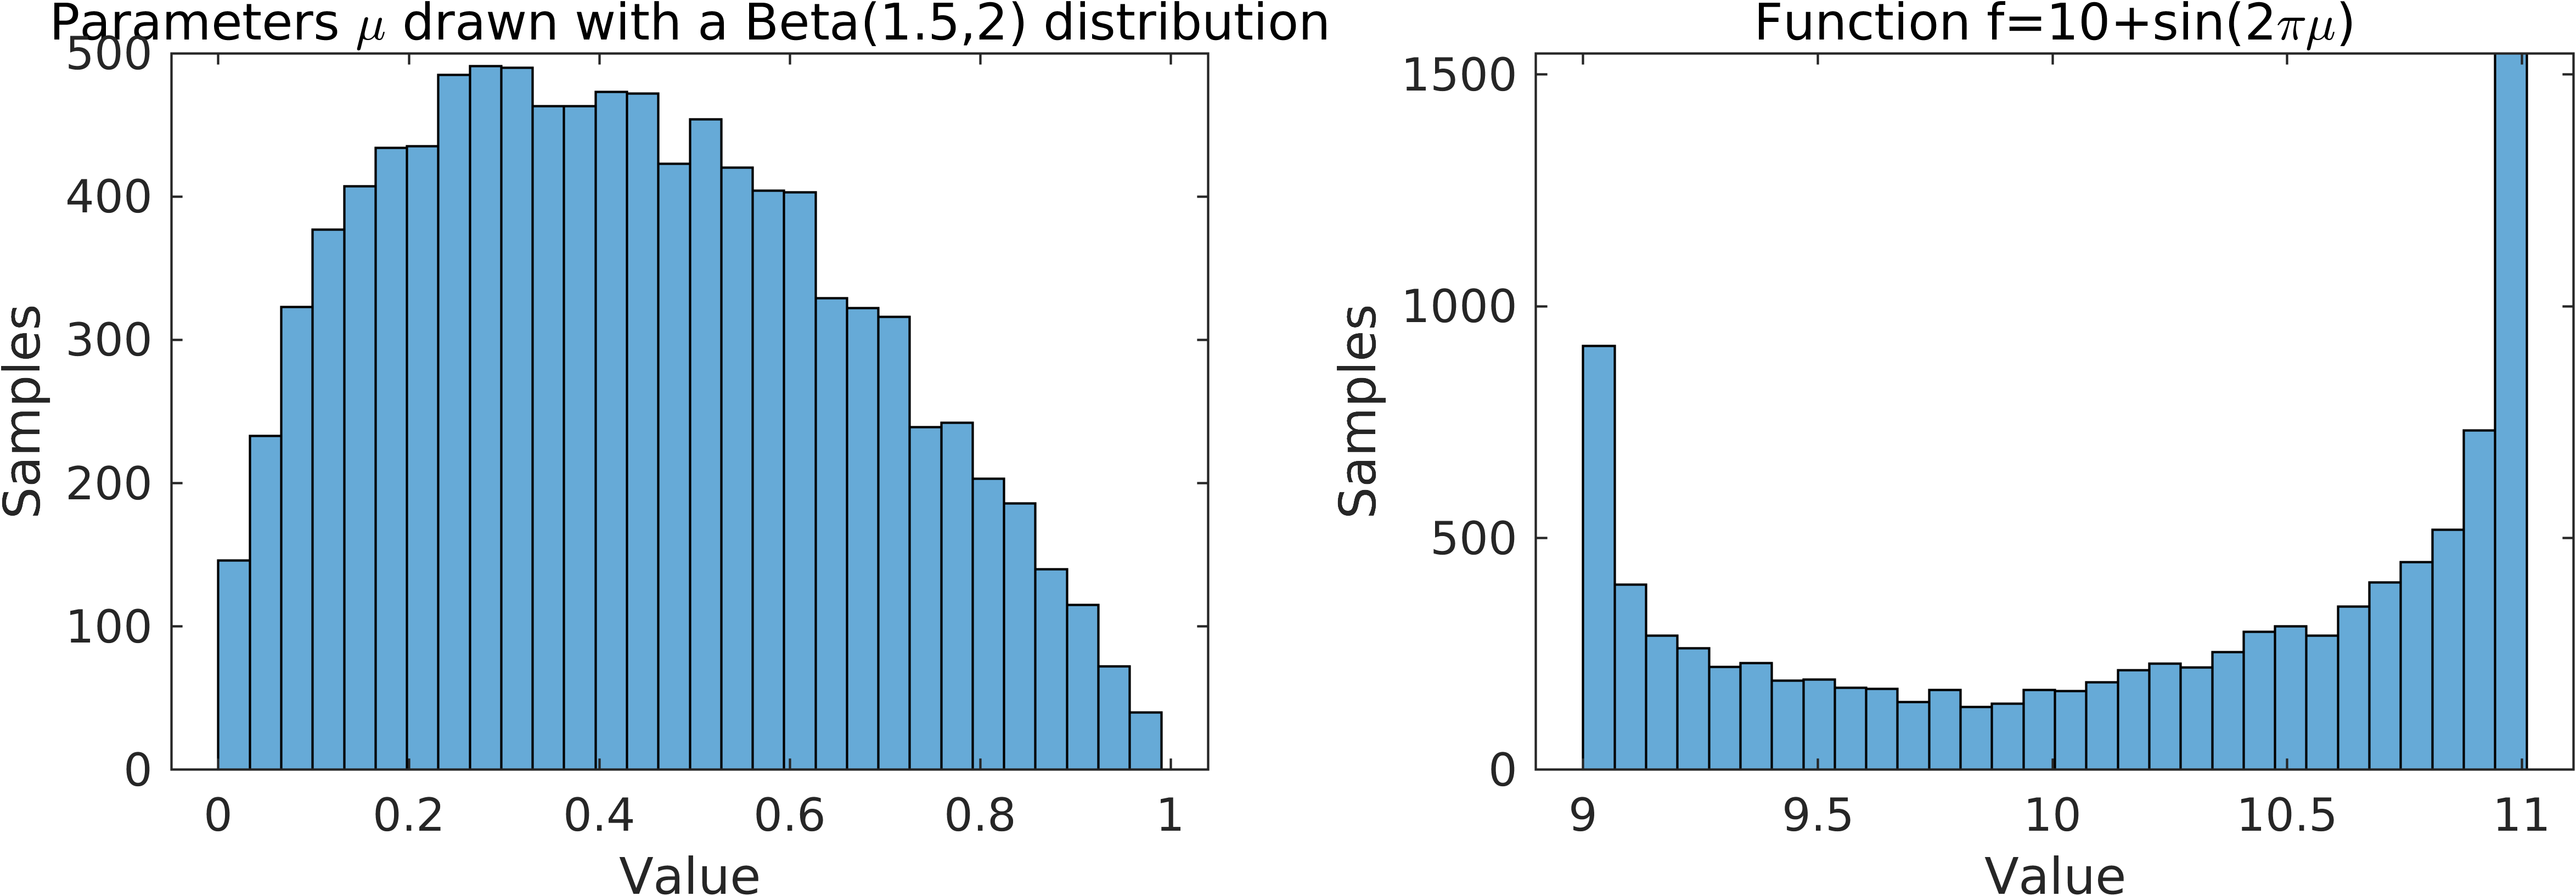 On the left: 10,000 samples drawn from a Beta(1.5,2) distribution. On the right: a function applied to the parameters.